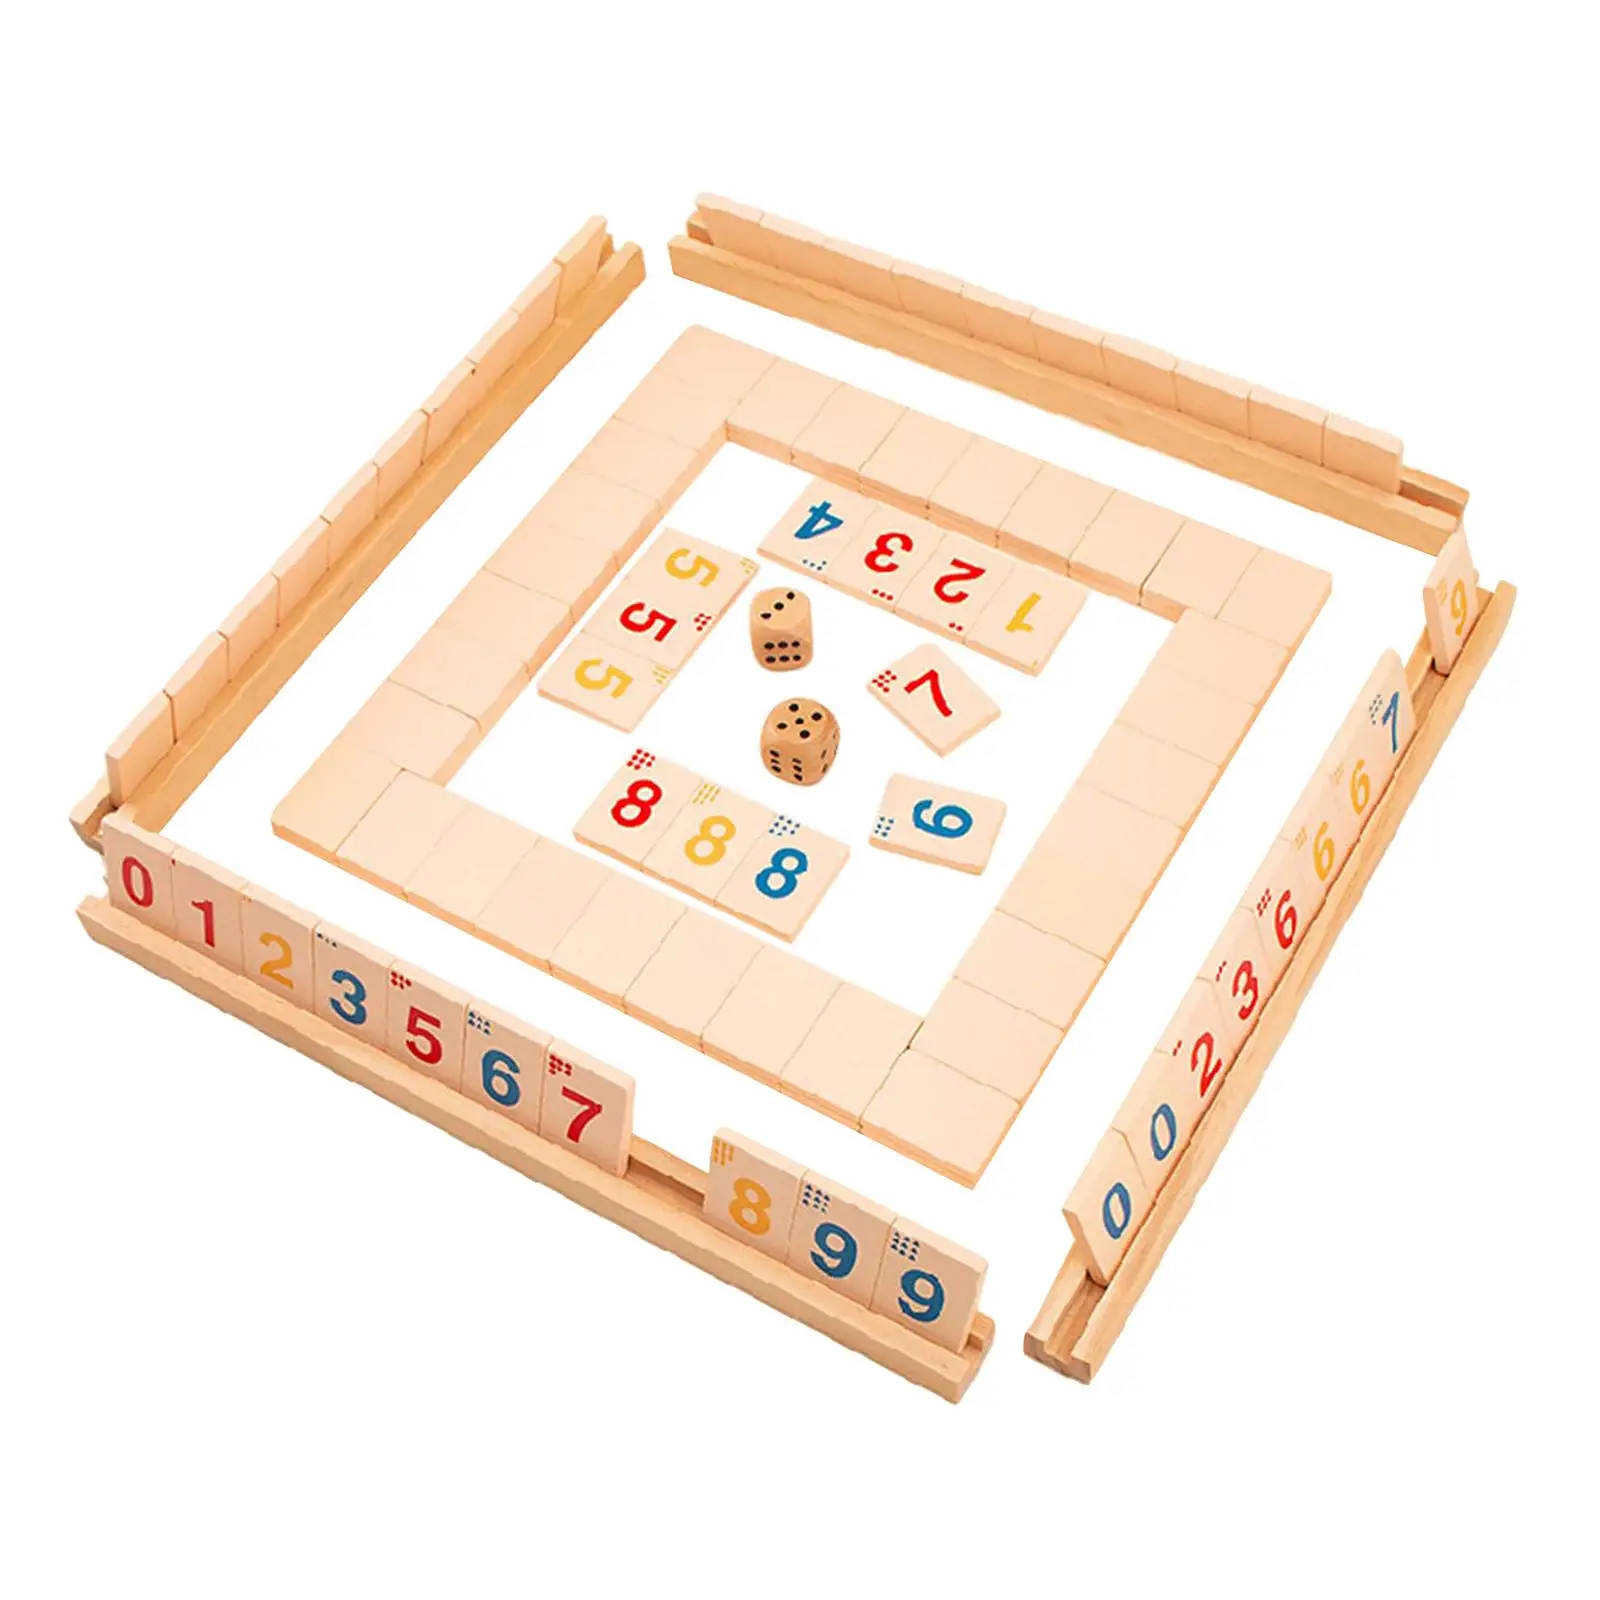 Wooden 2-4 People Mahjong Digital Game Family Party Game Fast Moving Tile for Teens Adults